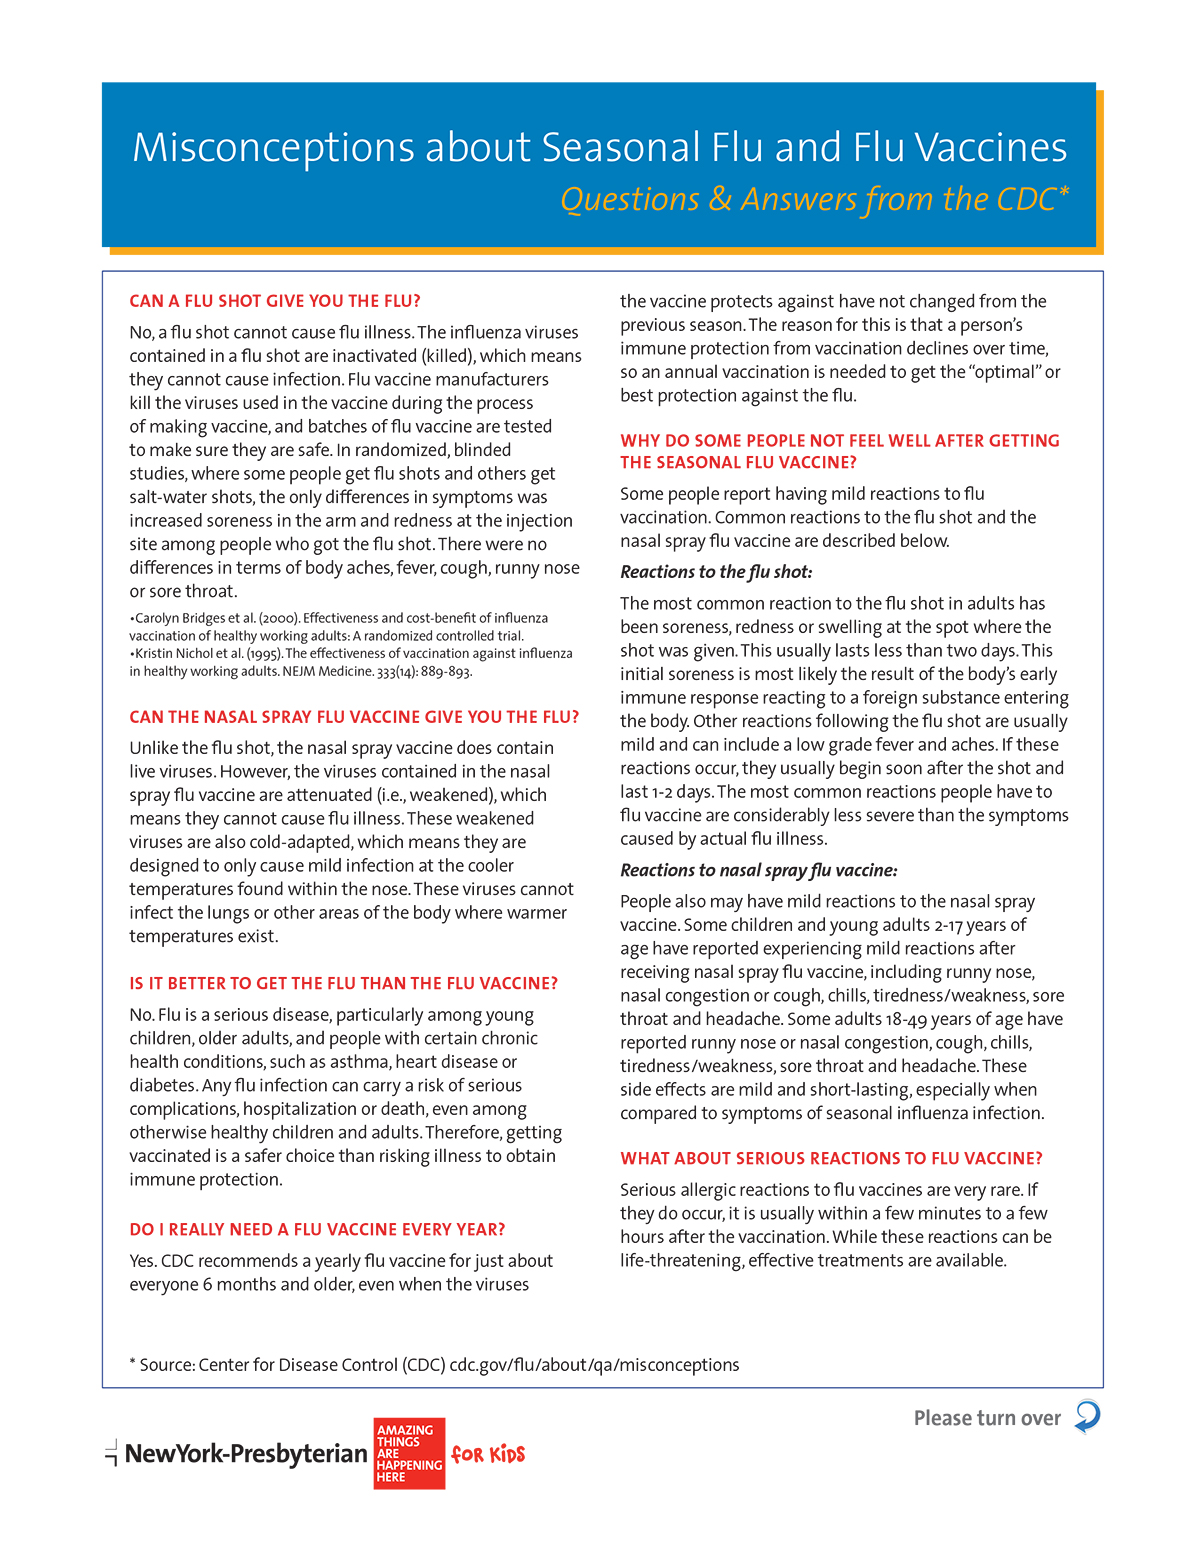 Misconceptions about Seasonal Flu and Flu Vaccines: Questions & Answers from the CDC*